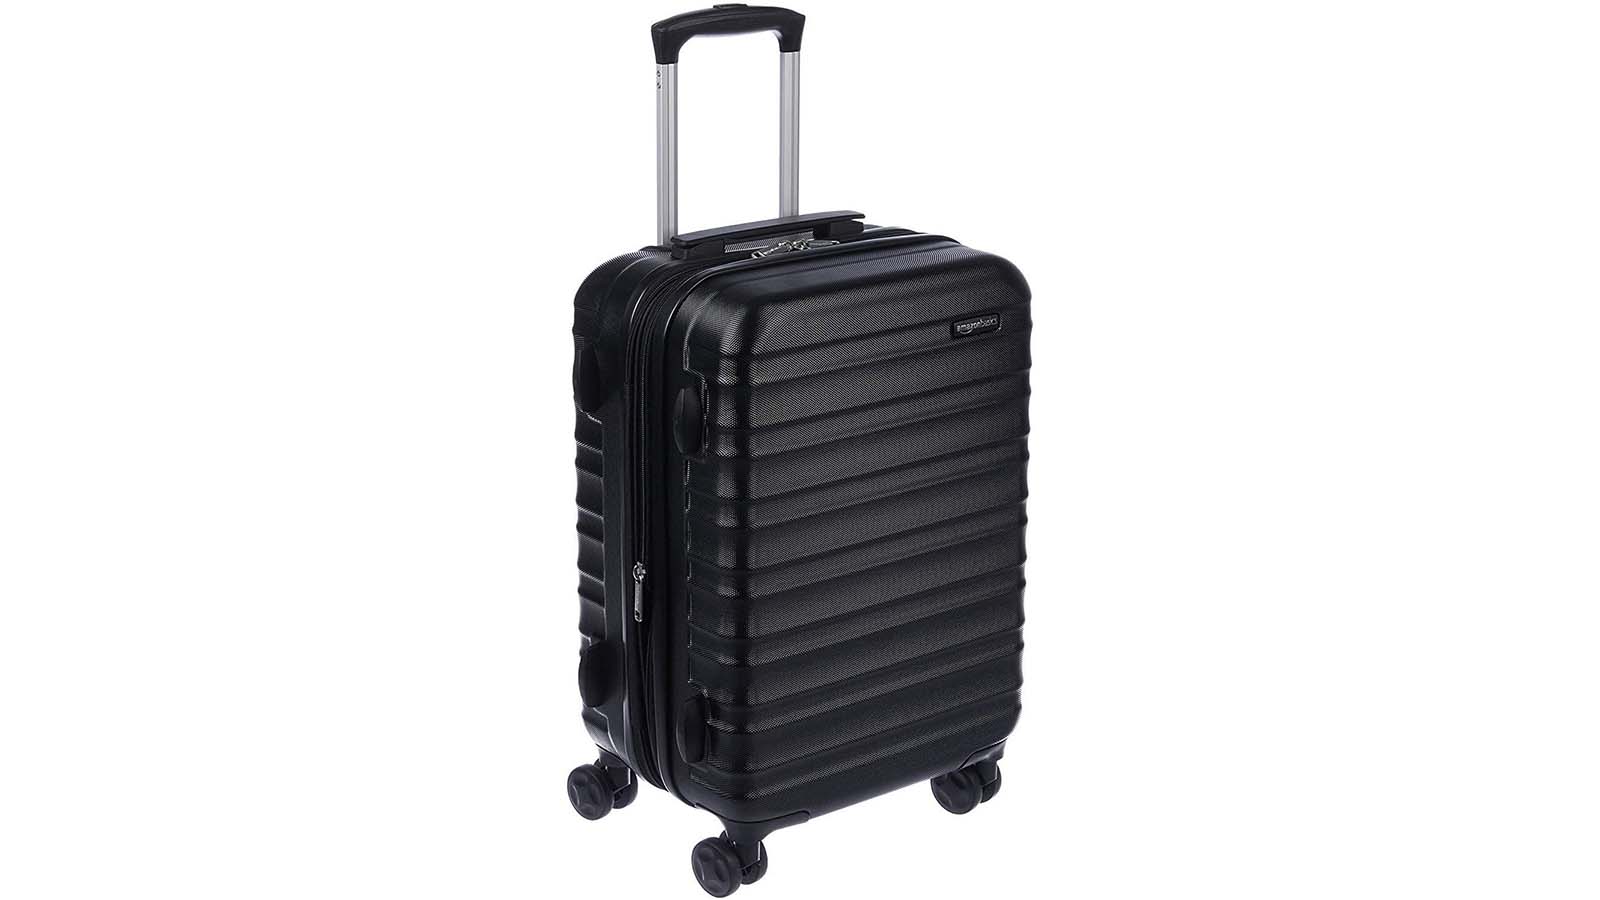 Carry-on Luggage Size Guide  Carry on luggage dimensions, Carry